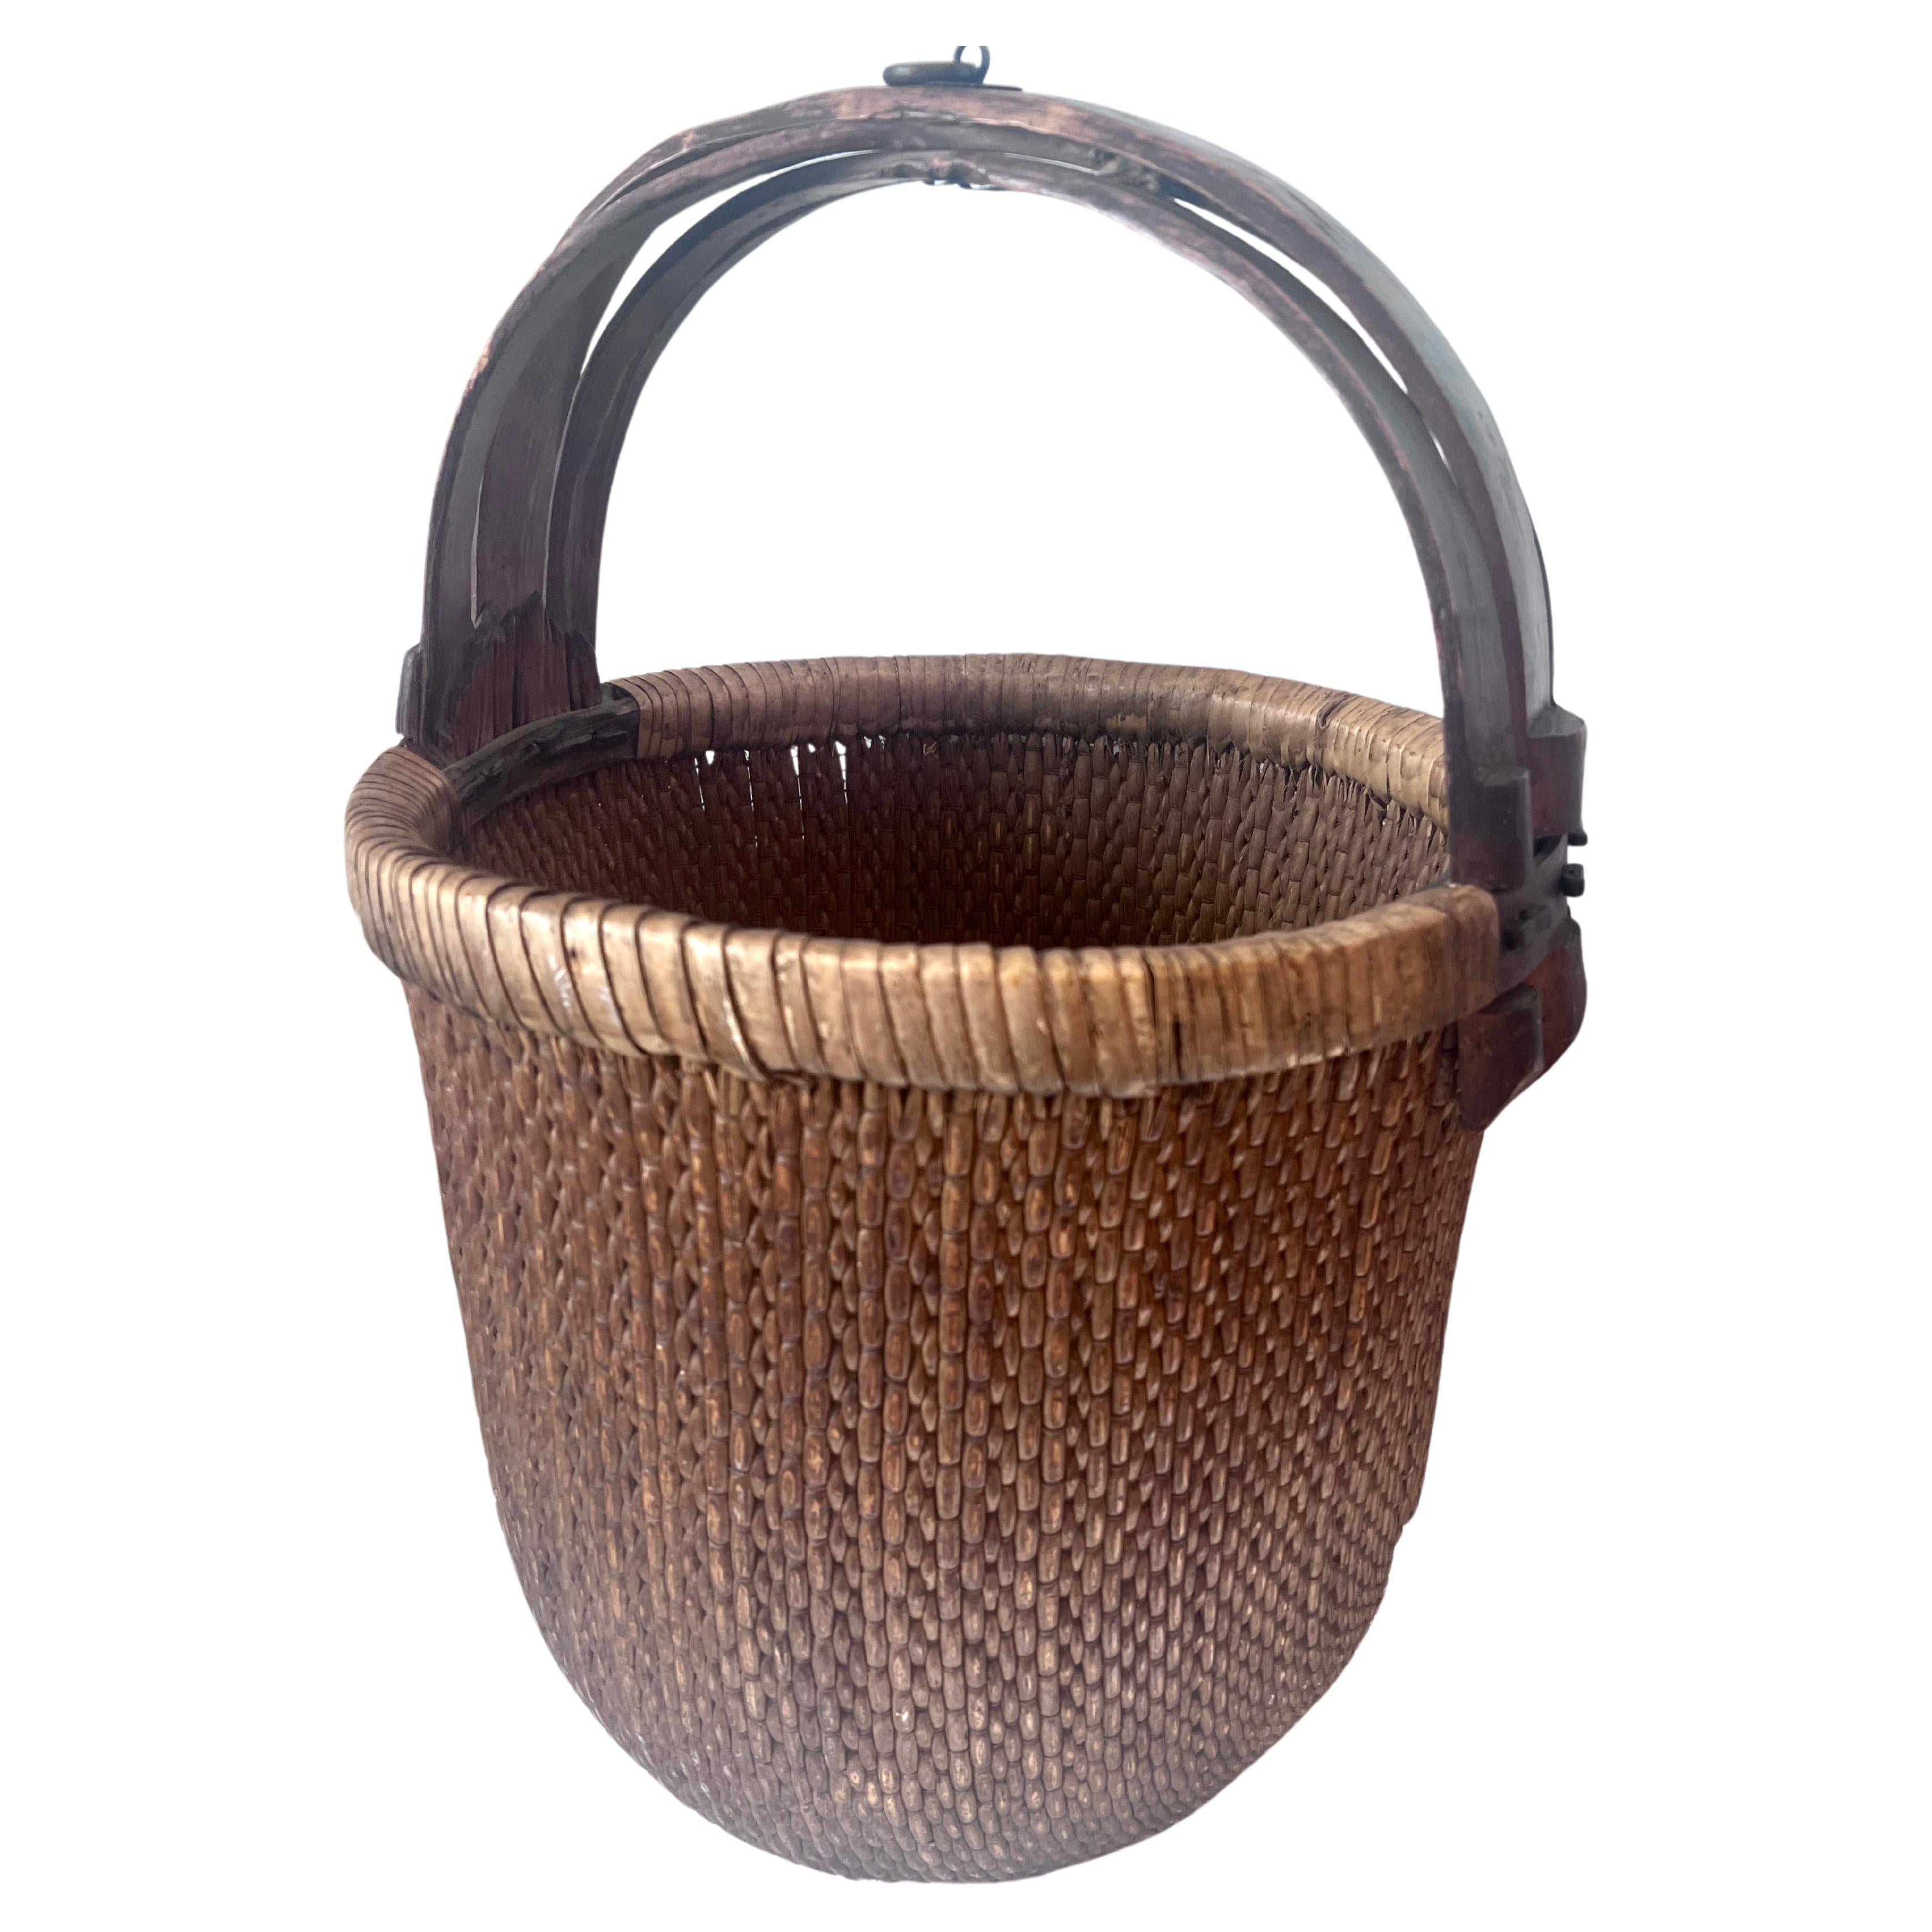 Hand Woven Rice Basket with Wooden Frame and Handle